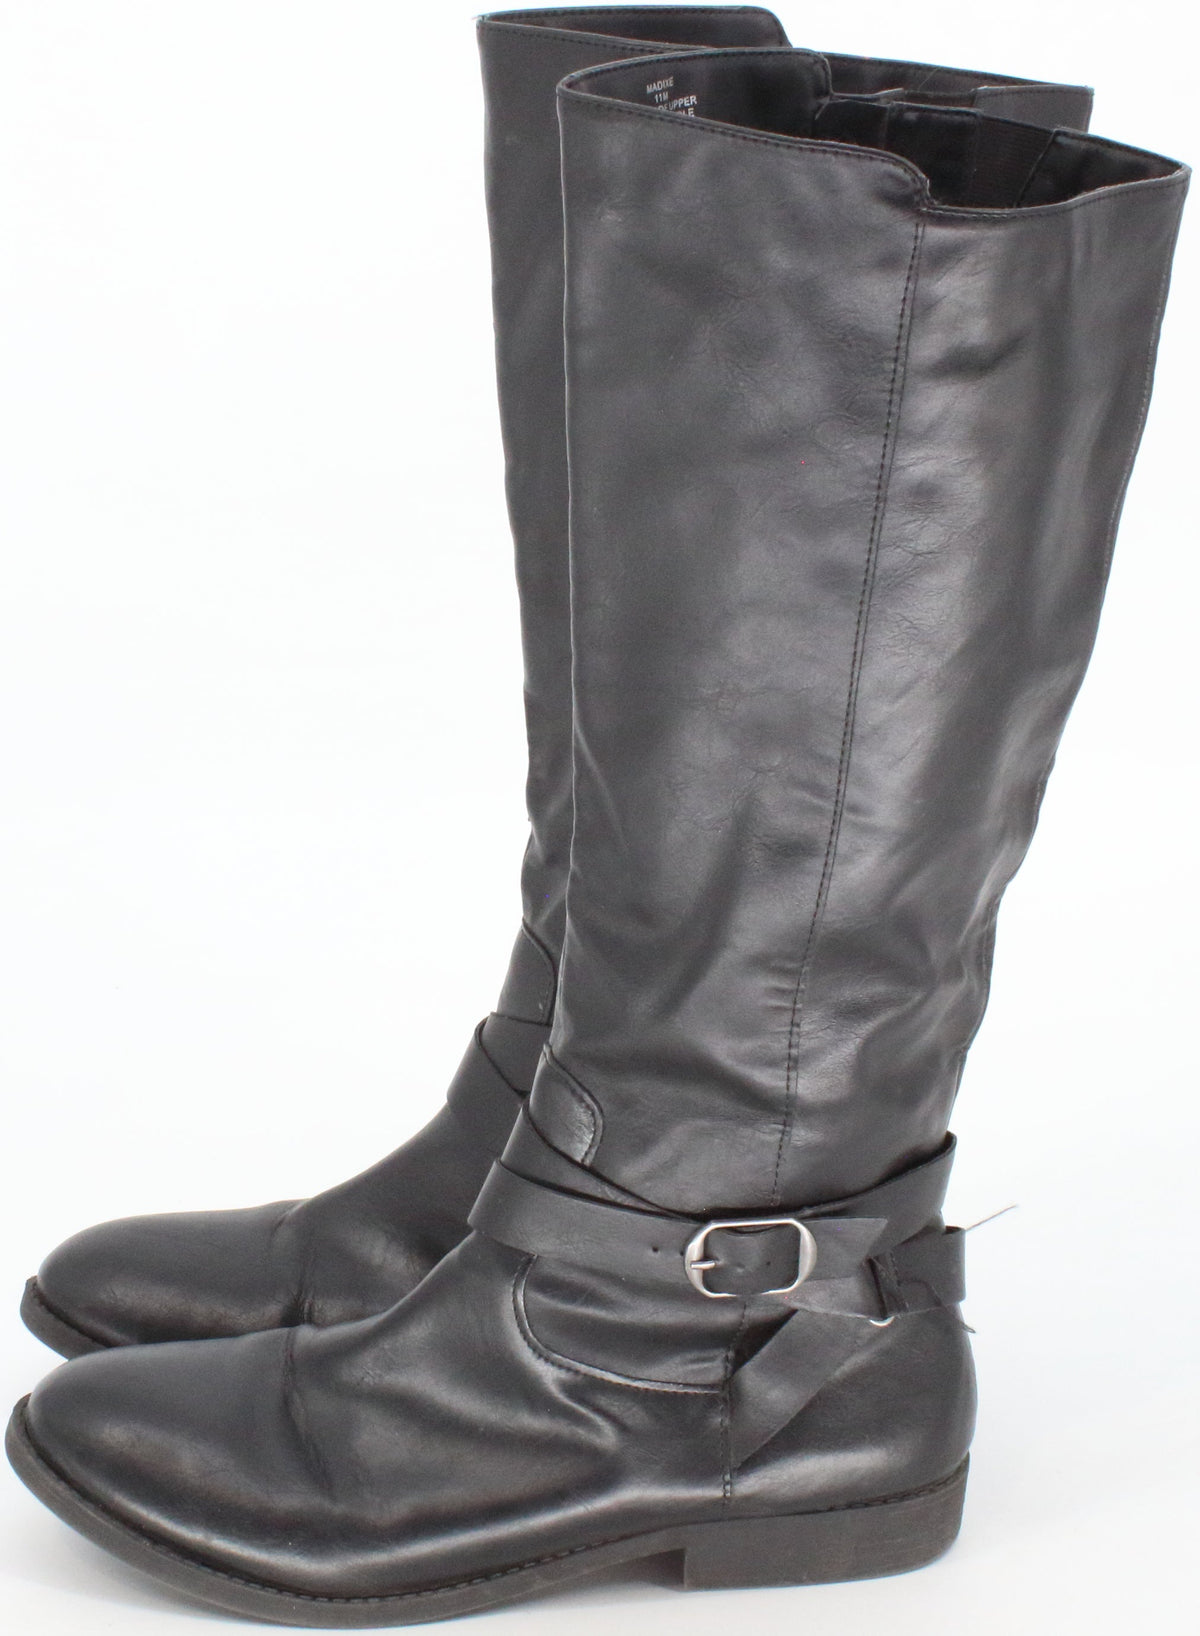 Style & Co. Black Calf Knee High Boots